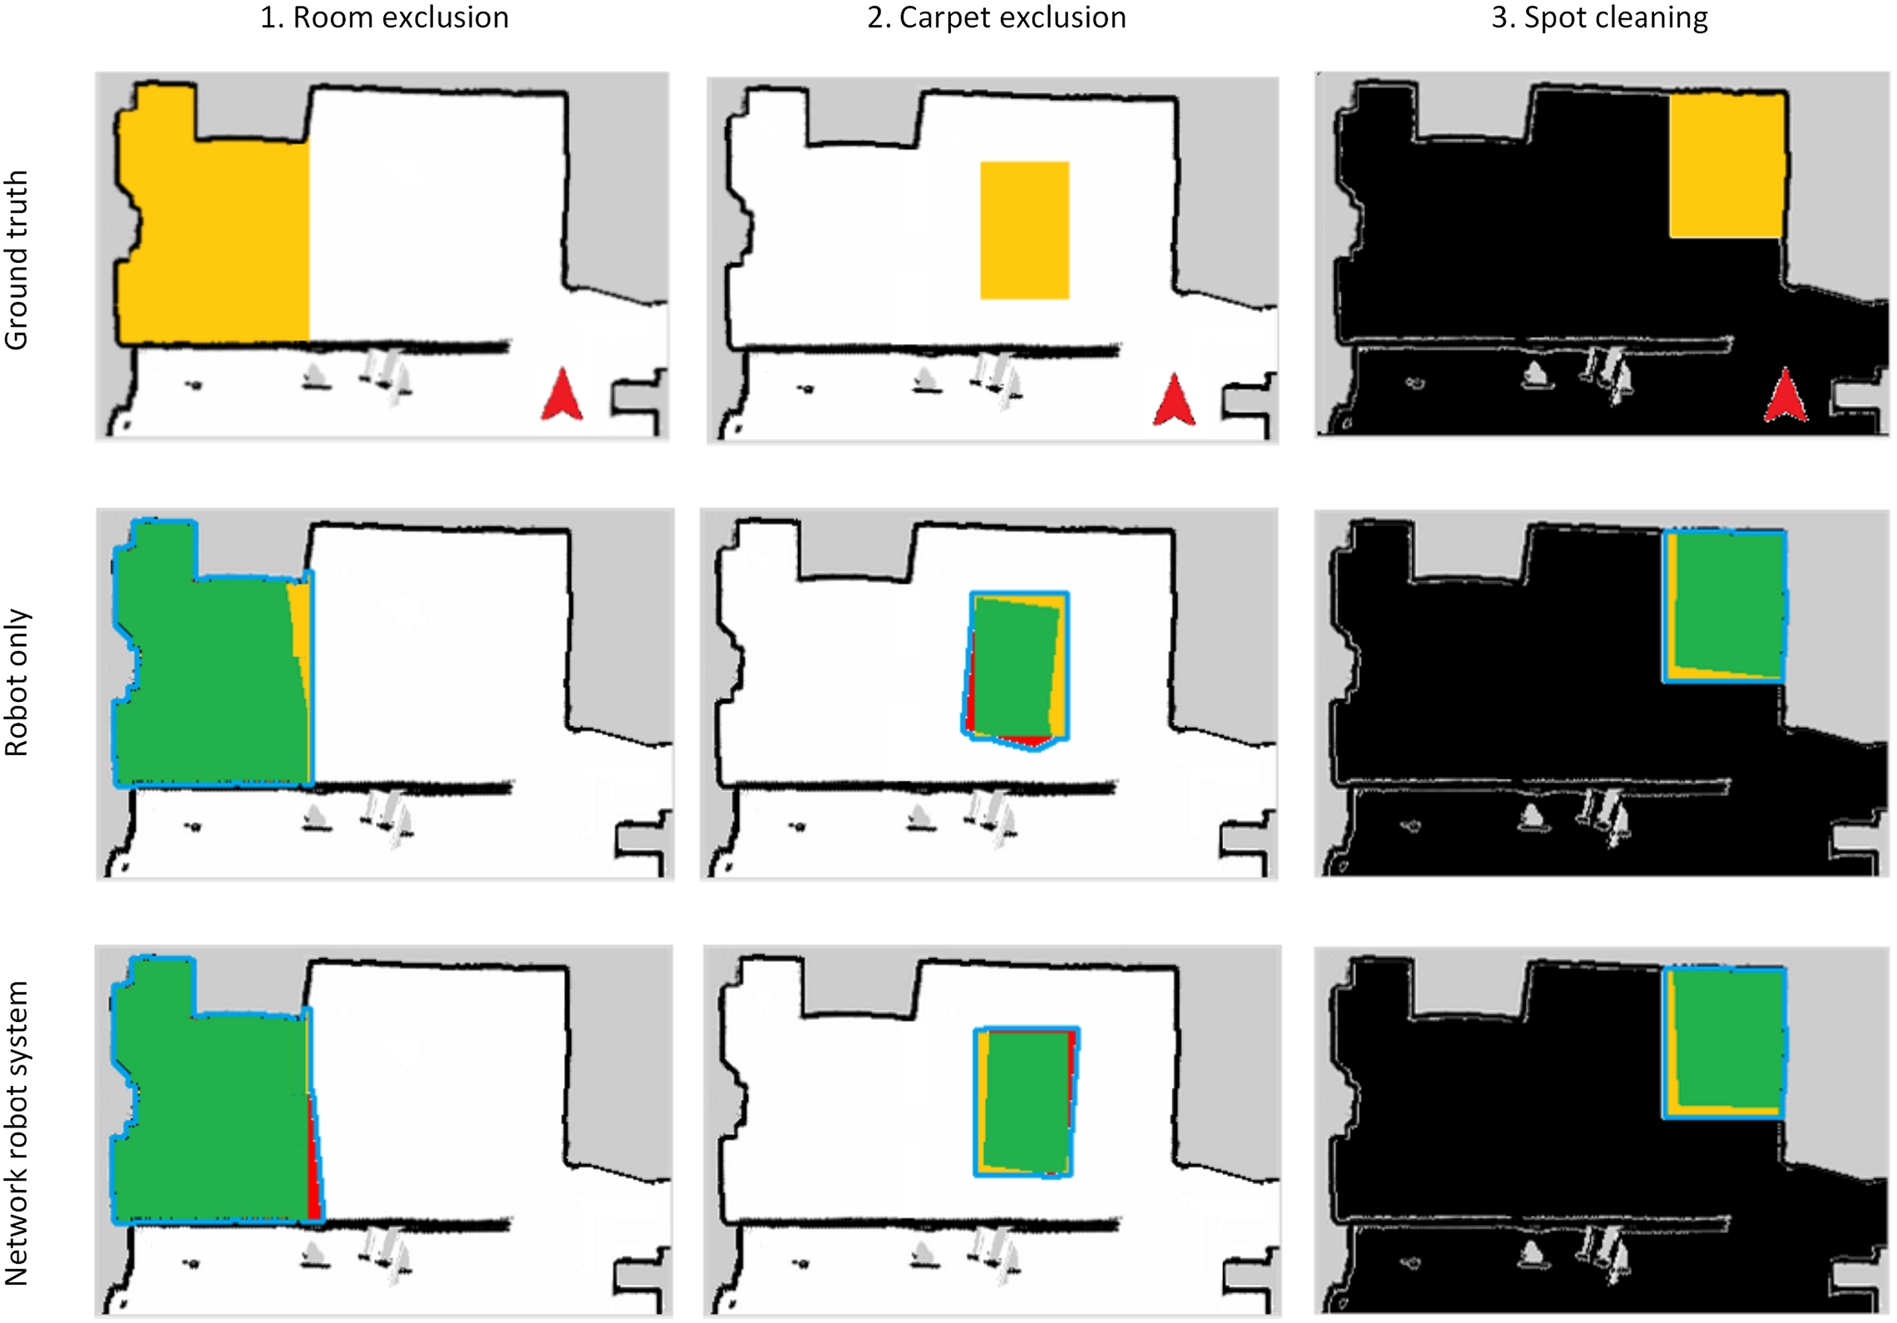 Visualization of representative accuracy results. The first row shows ground truth maps for all three scenarios containing occupied (black), free (white) and unknown (gray) areas. The yellow cells indicate the area to be specified by a participant during an interaction process (GT). The robot’s start pose is visualized as a red arrow. The following rows visualize the qualitative accuracy results for both interaction methods. A user-defined area as result of an interaction process is colored in green and red. Green pixels indicate the overlap of ground truth and user-defined areas (GT ∩ UD), while red pixels show areas defined by the user but not contained in the ground truth map (UD ∖ GT). A blue contour surrounds the union set of both areas (GT ∪ UD). Colors are only used for visualization.